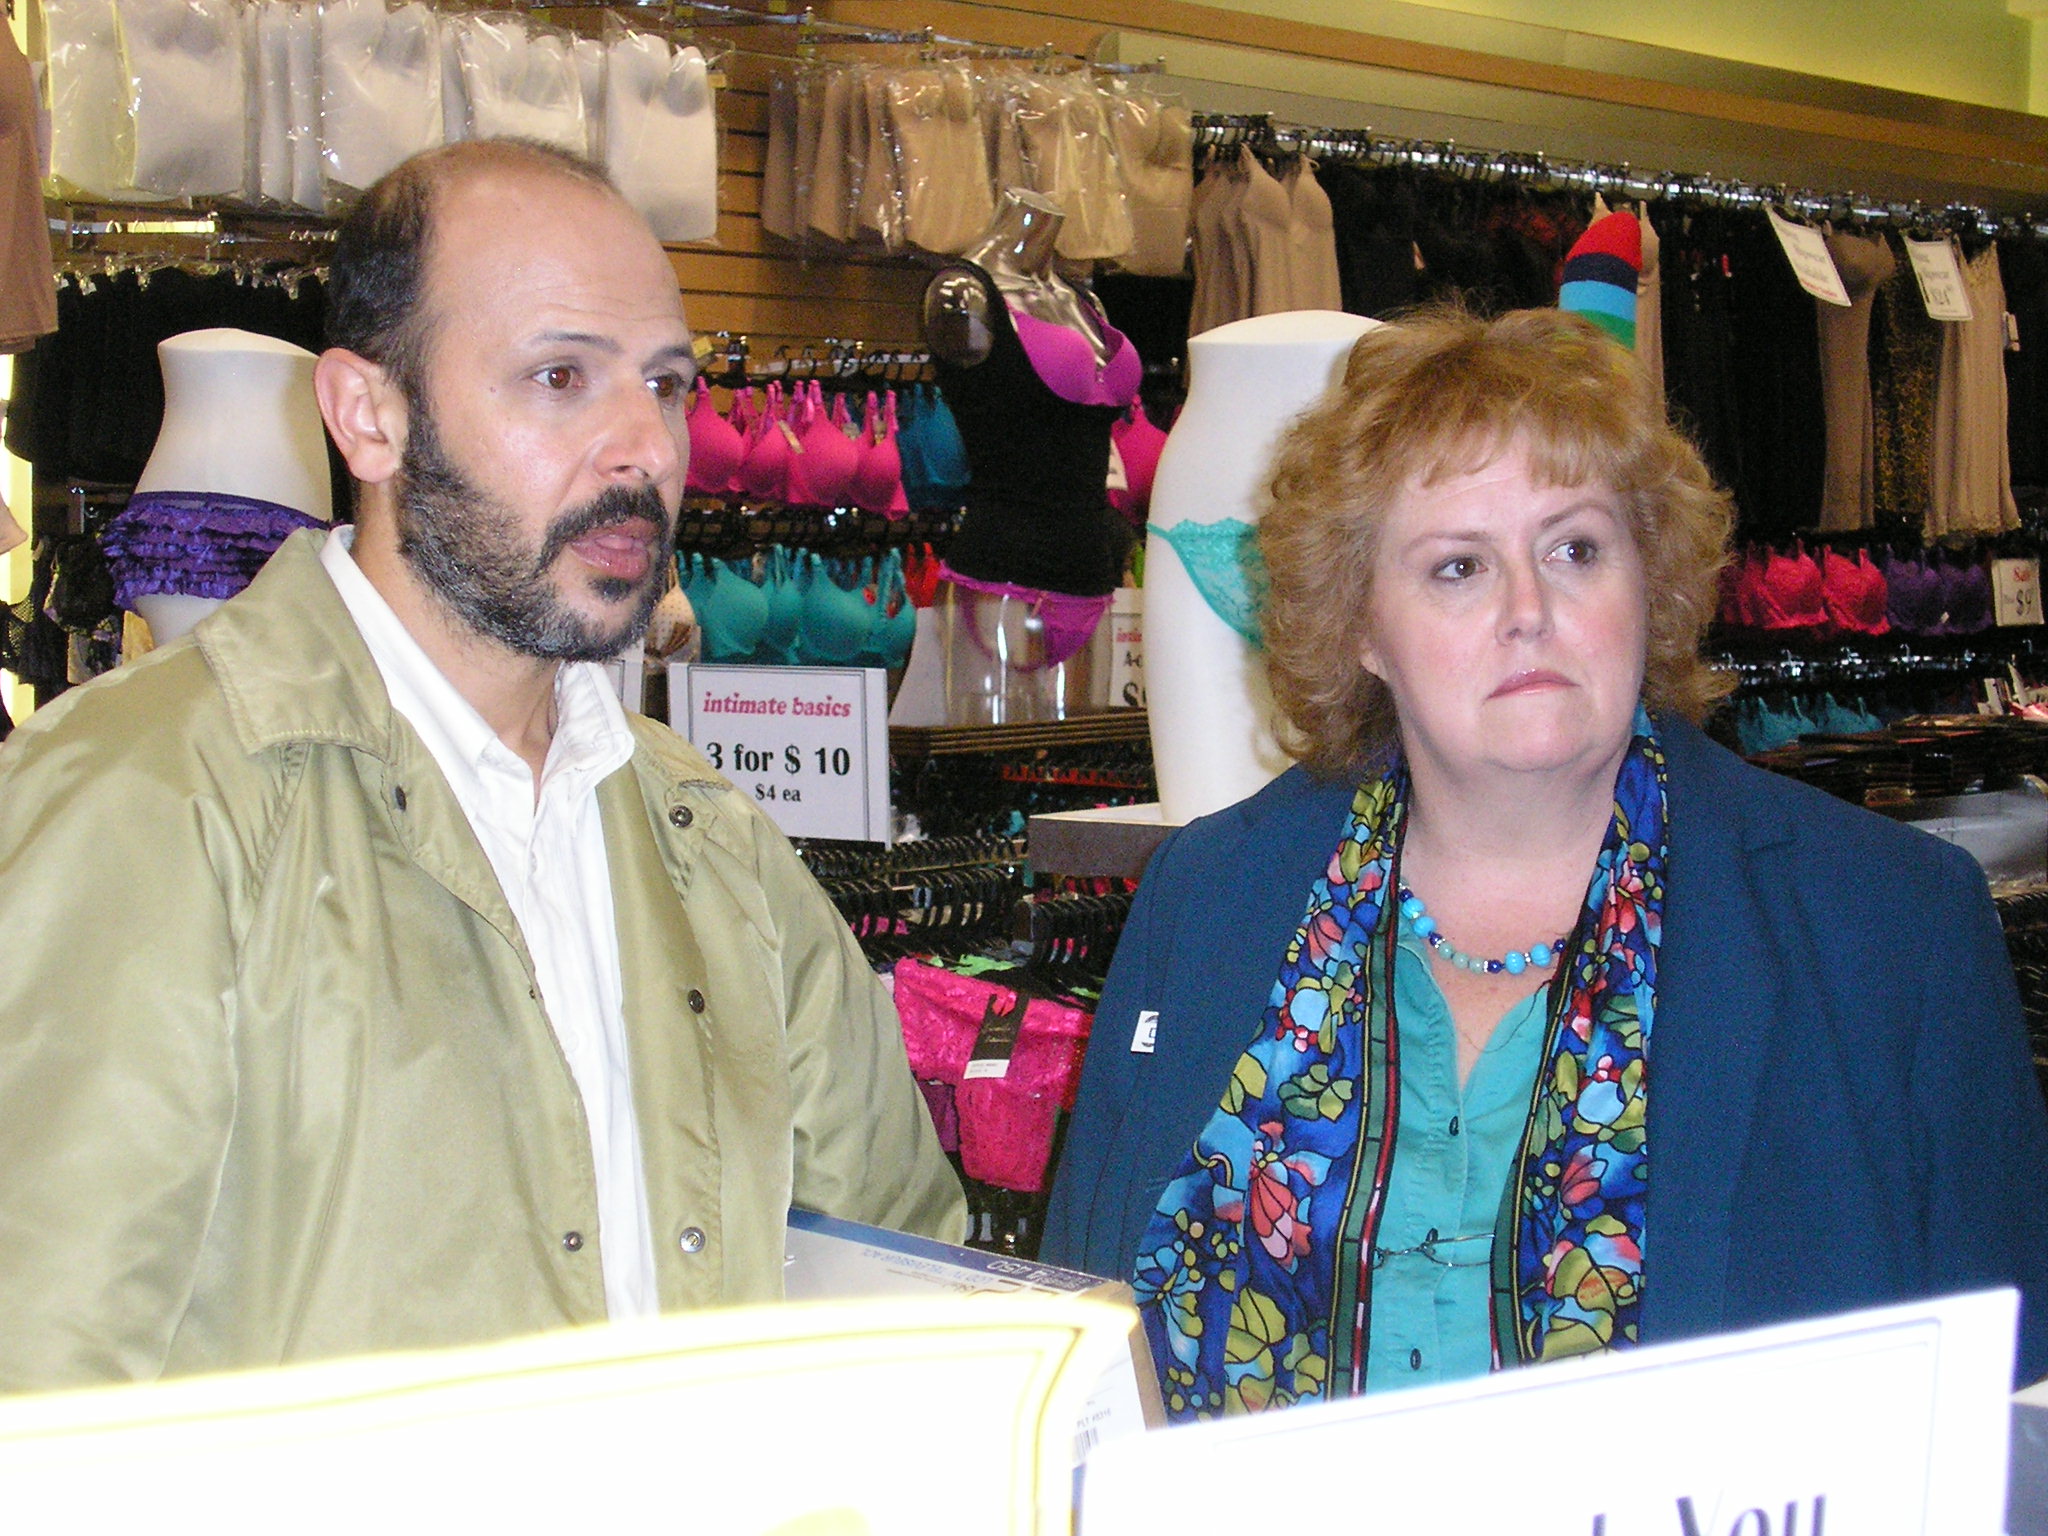 A still of Tracy Weisert & Maz Jobrani from the set of REZA HASSANI GOES TO THE MALL with